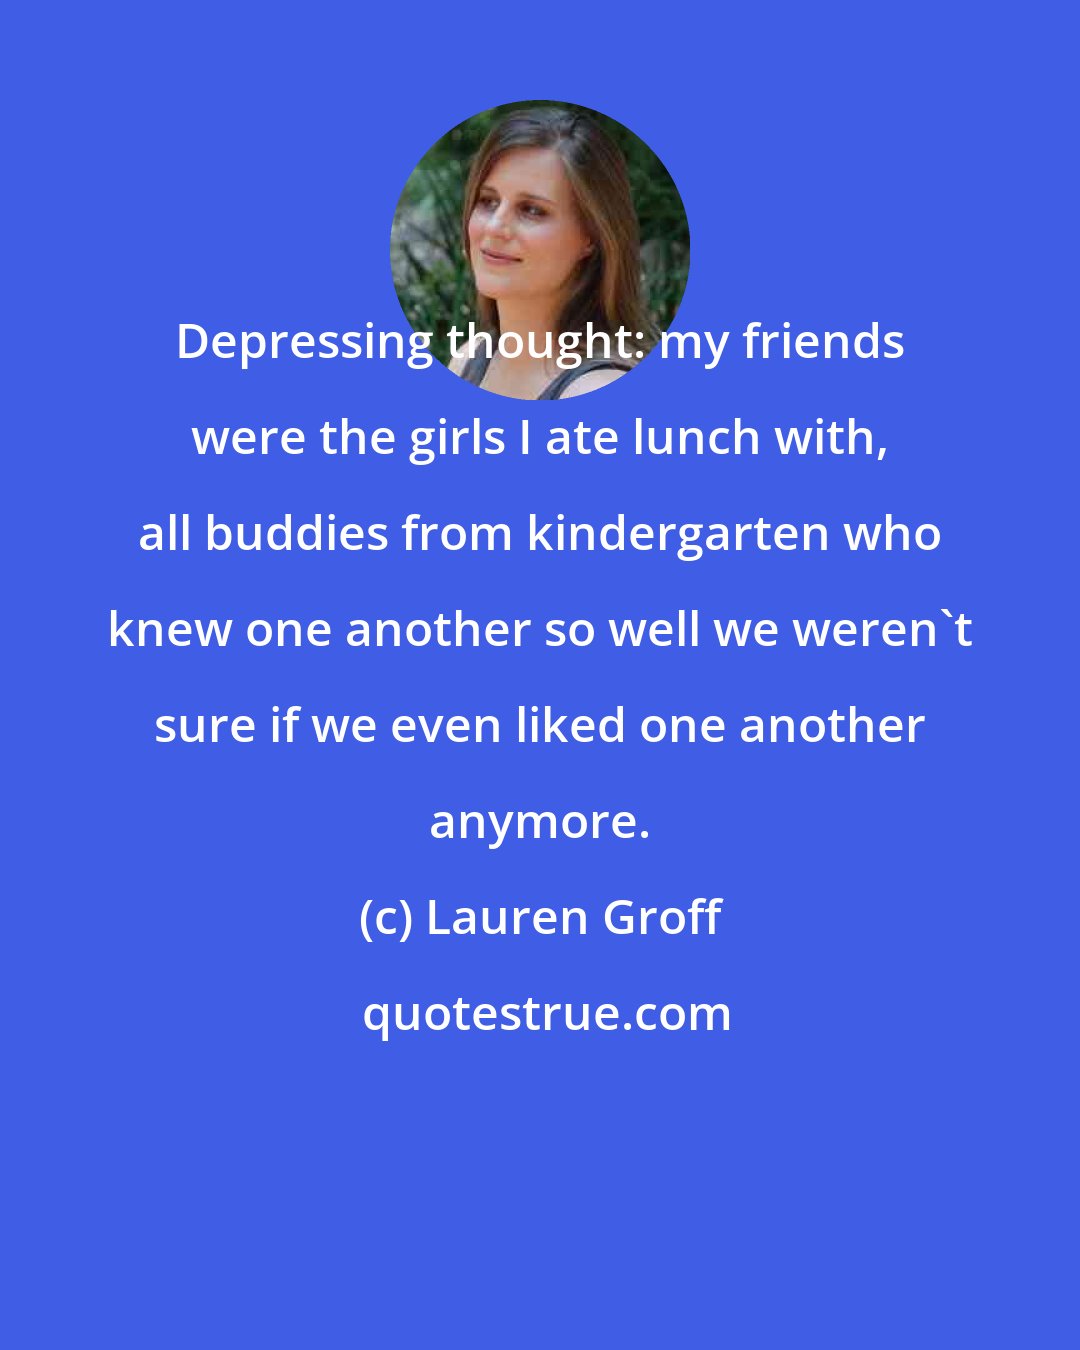 Lauren Groff: Depressing thought: my friends were the girls I ate lunch with, all buddies from kindergarten who knew one another so well we weren't sure if we even liked one another anymore.